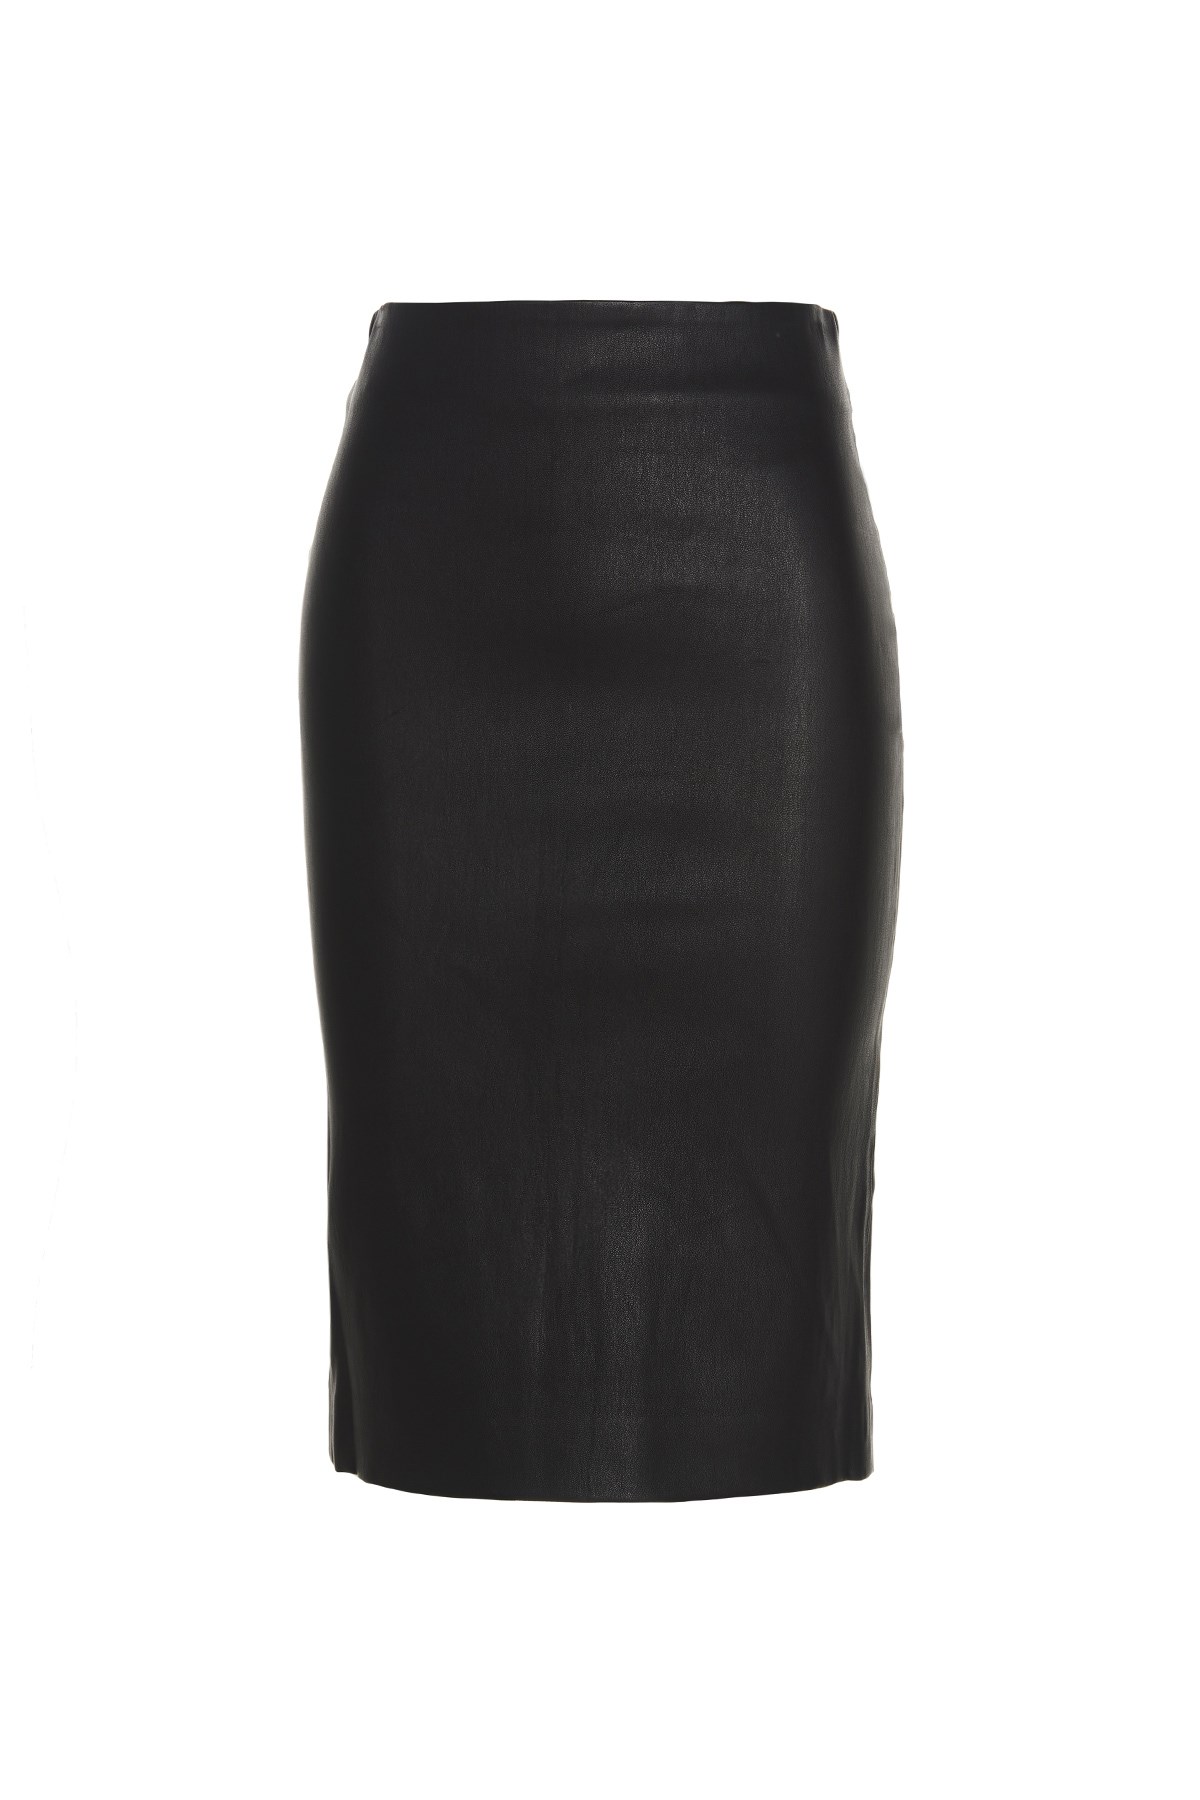 THEORY 'Skinny Pencil’ Leather Skirt